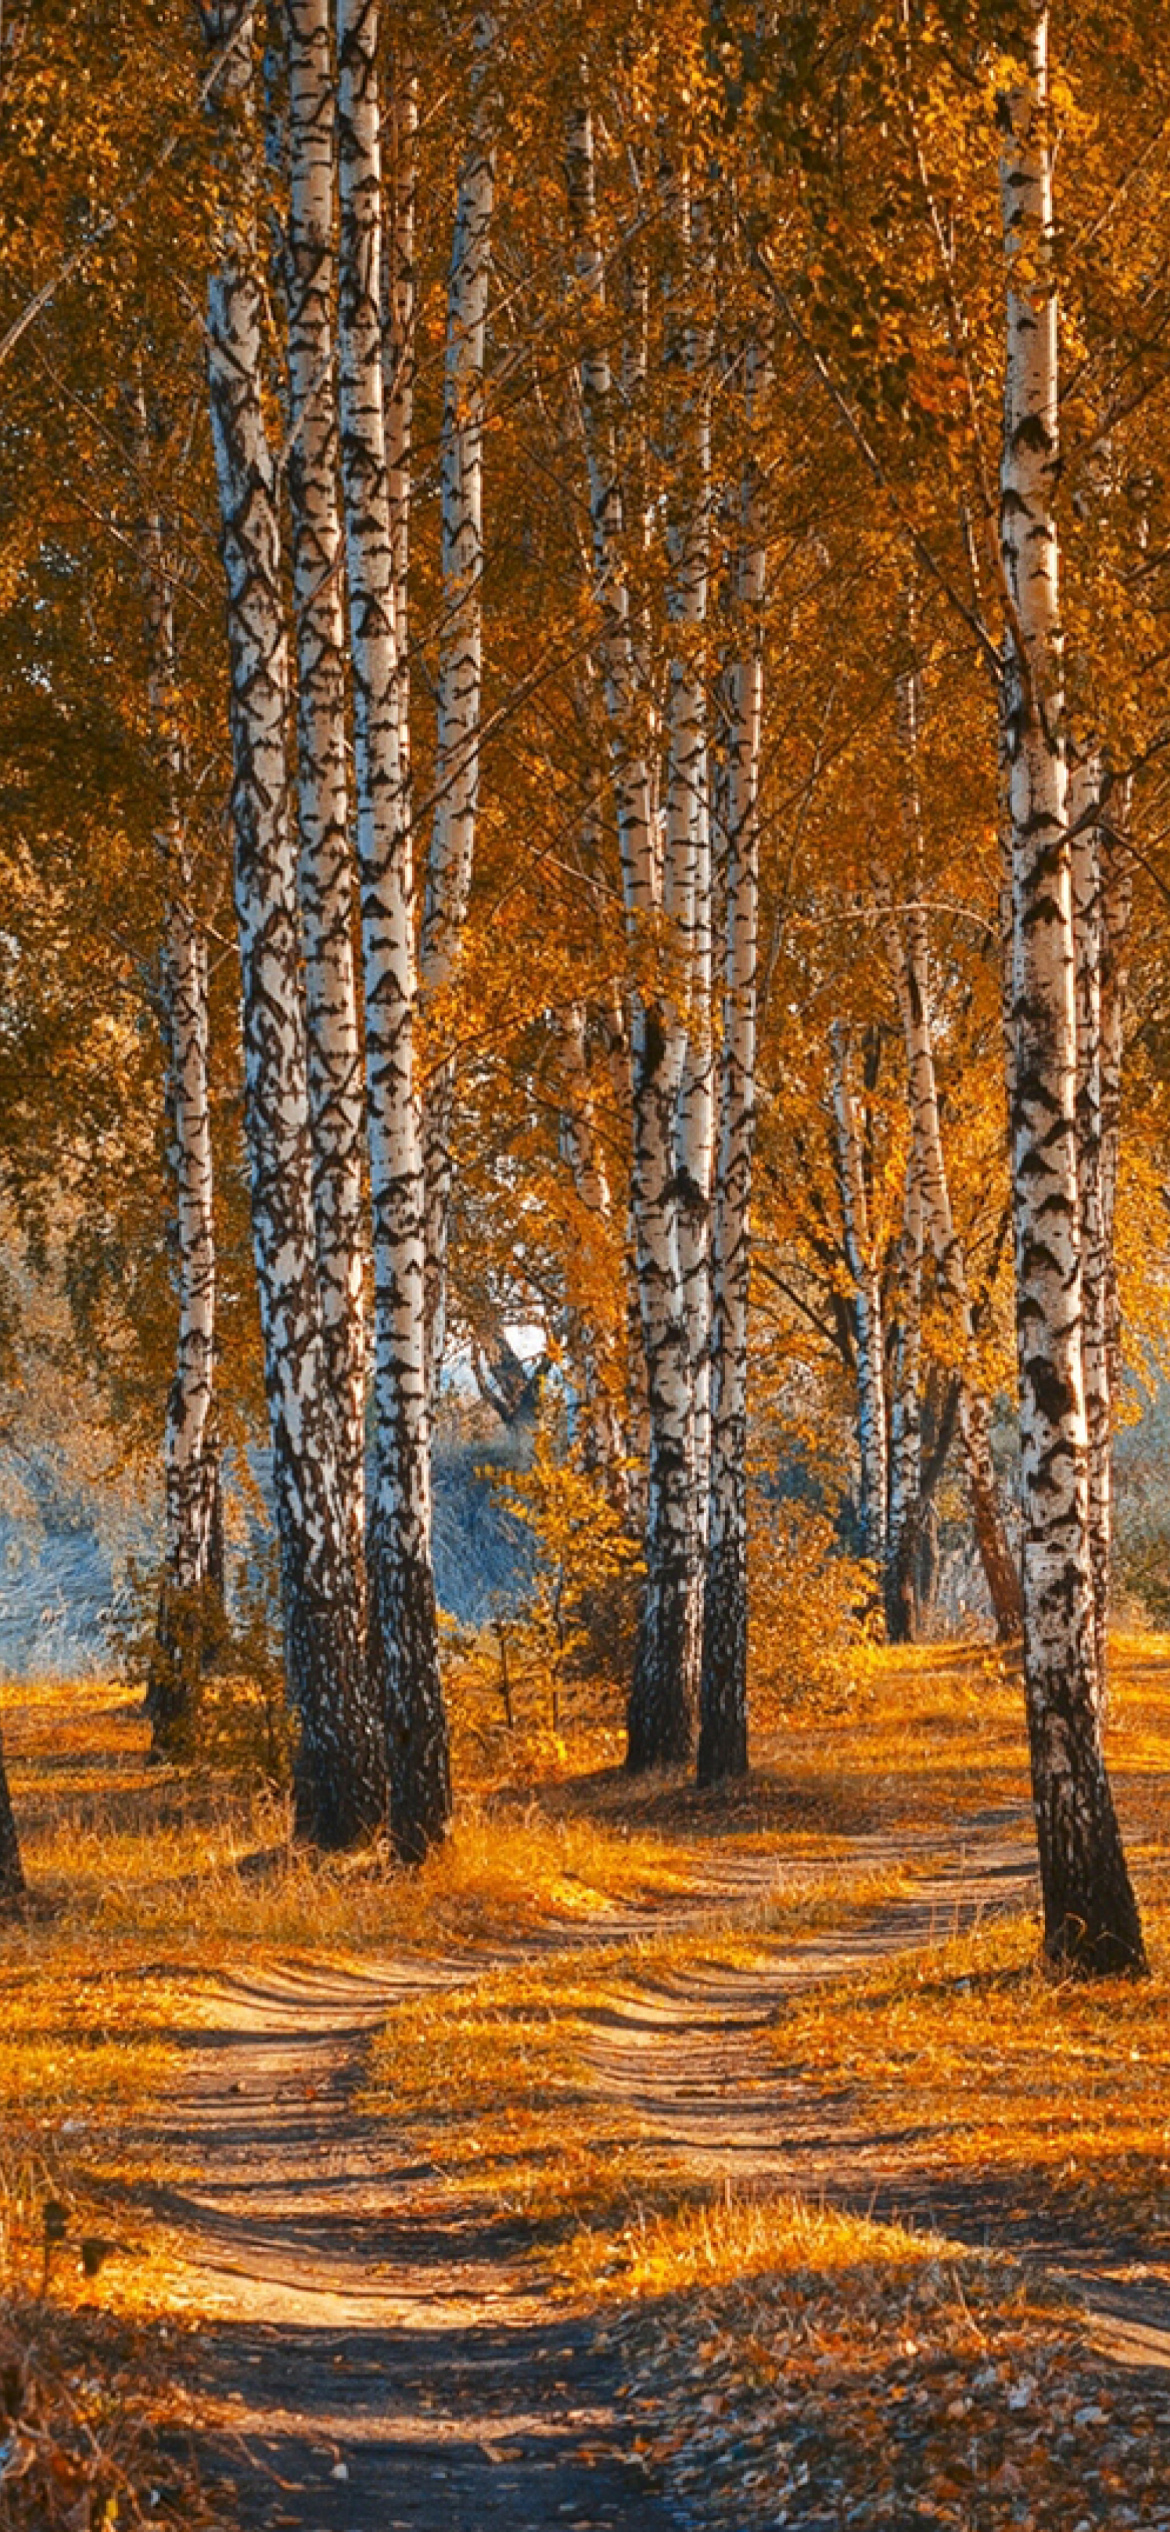 Autumn Forest in October wallpaper 1170x2532